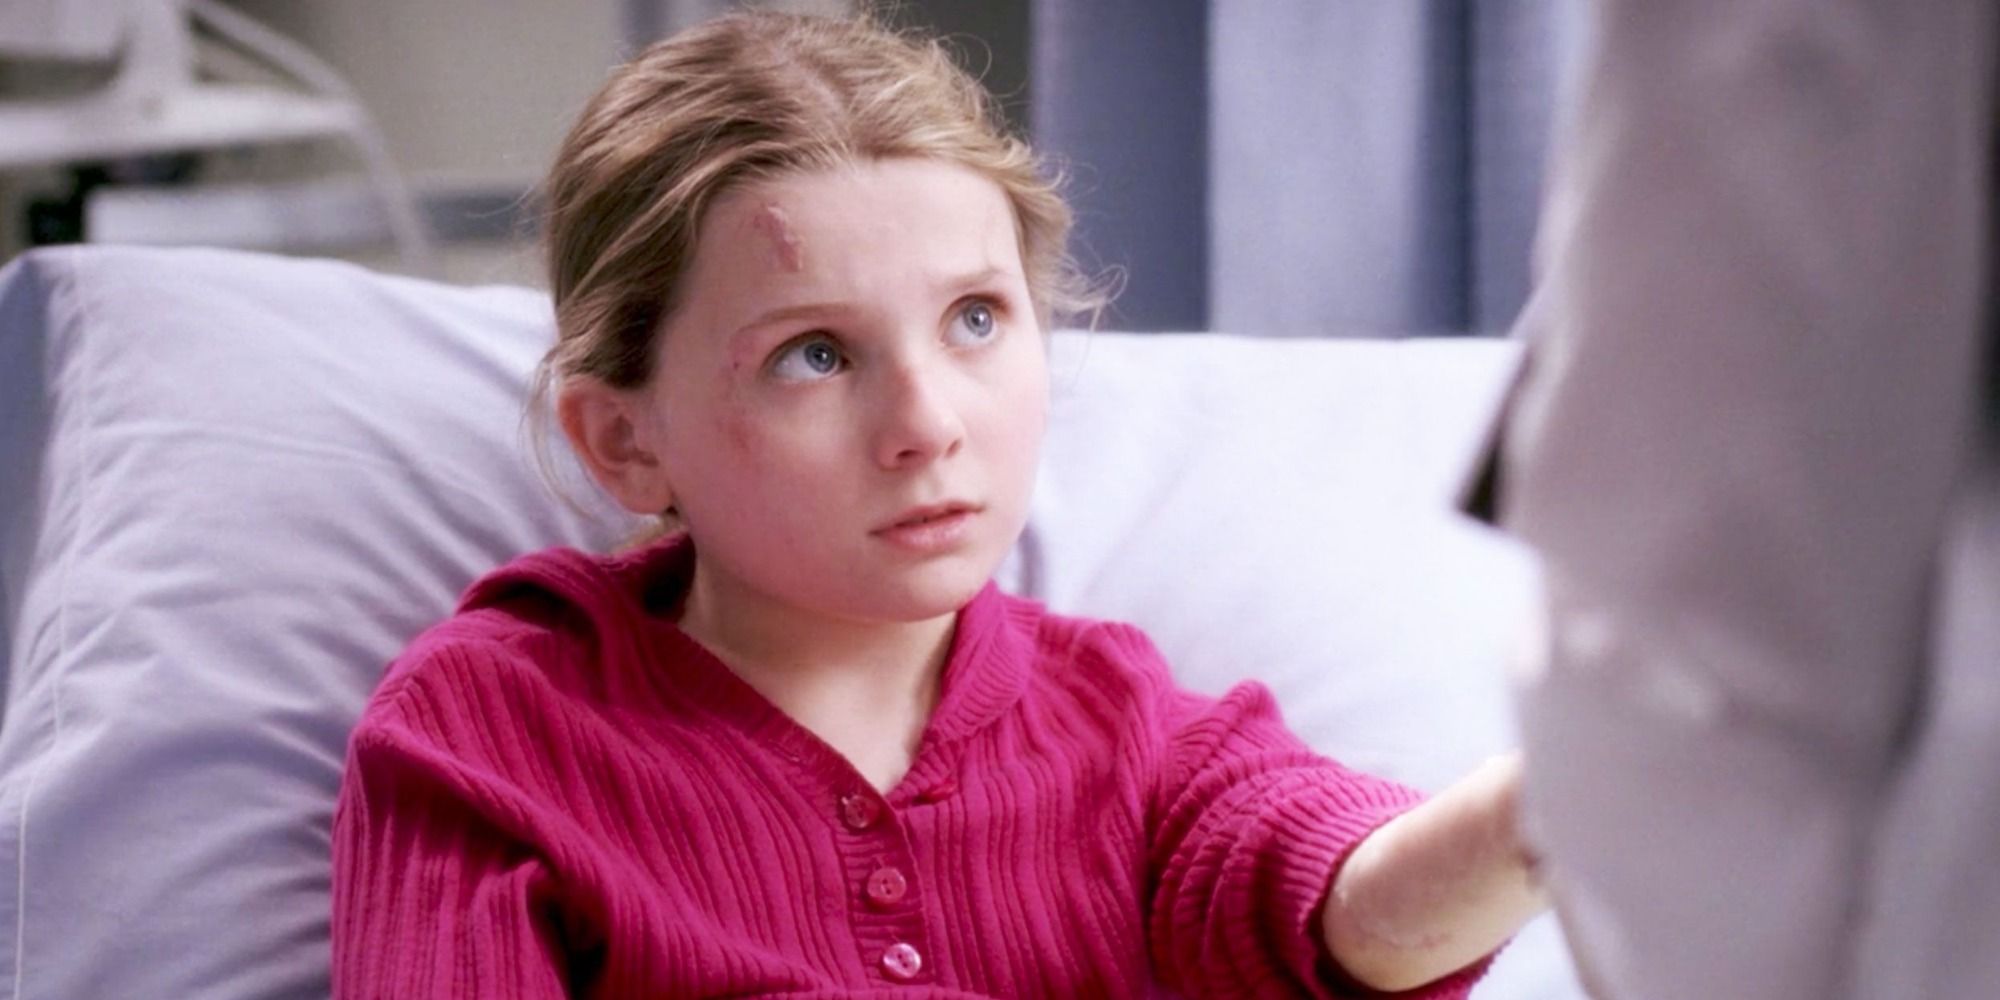 An image of Abigail Breslin's character, Megan, in Grey's Anatomy